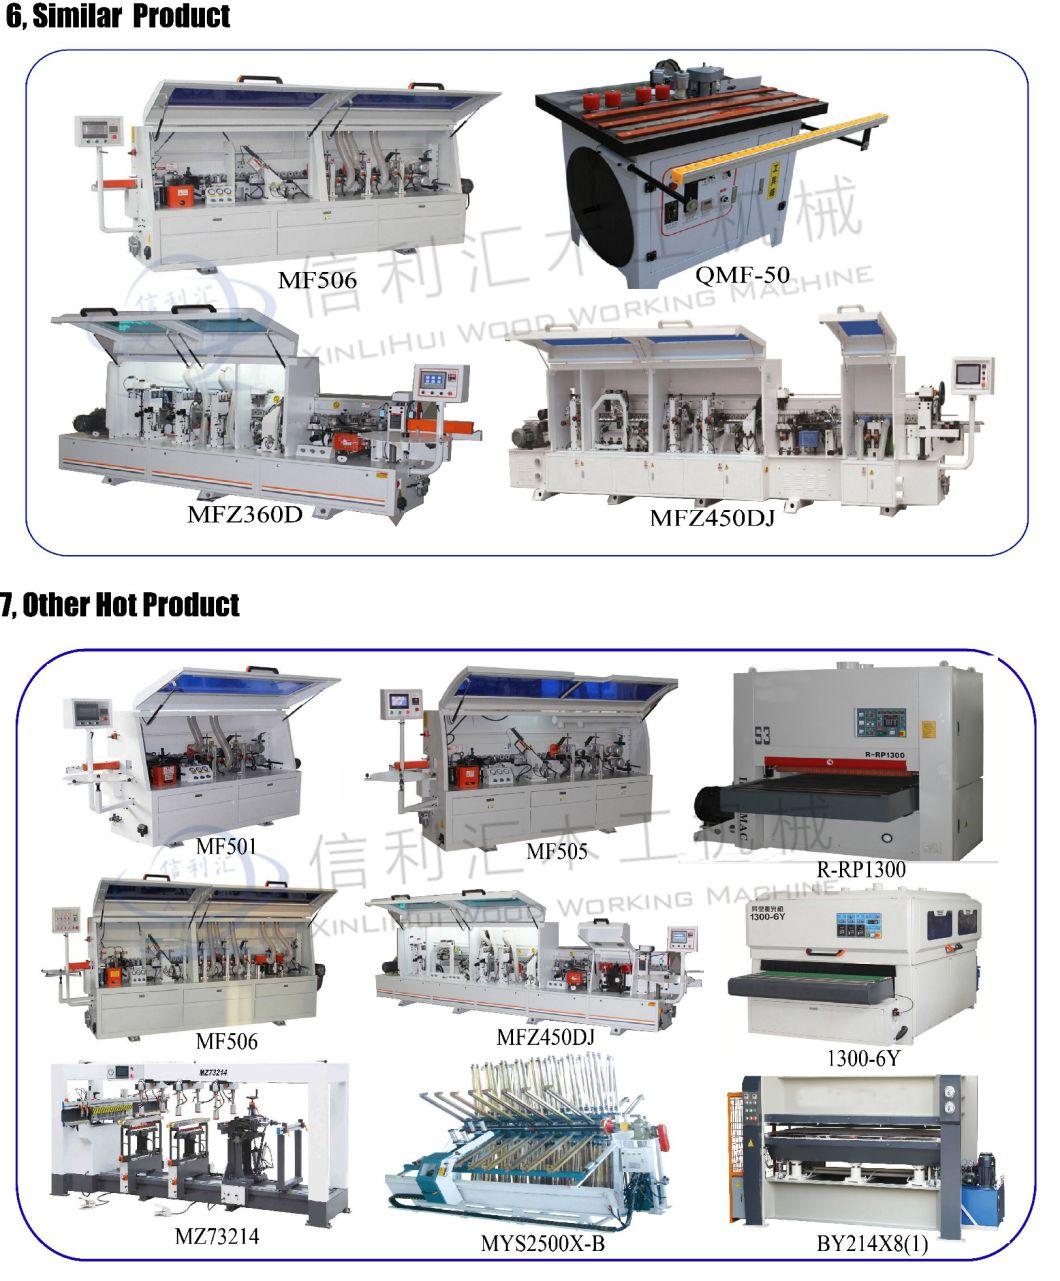 Edge Laminating Machine to Edge Laminated Boards/PVC/MDF and Partical Board in Malaysia PVC Edging Tape Furniture Fitting Manufacturing/Wood Flooring Machinery